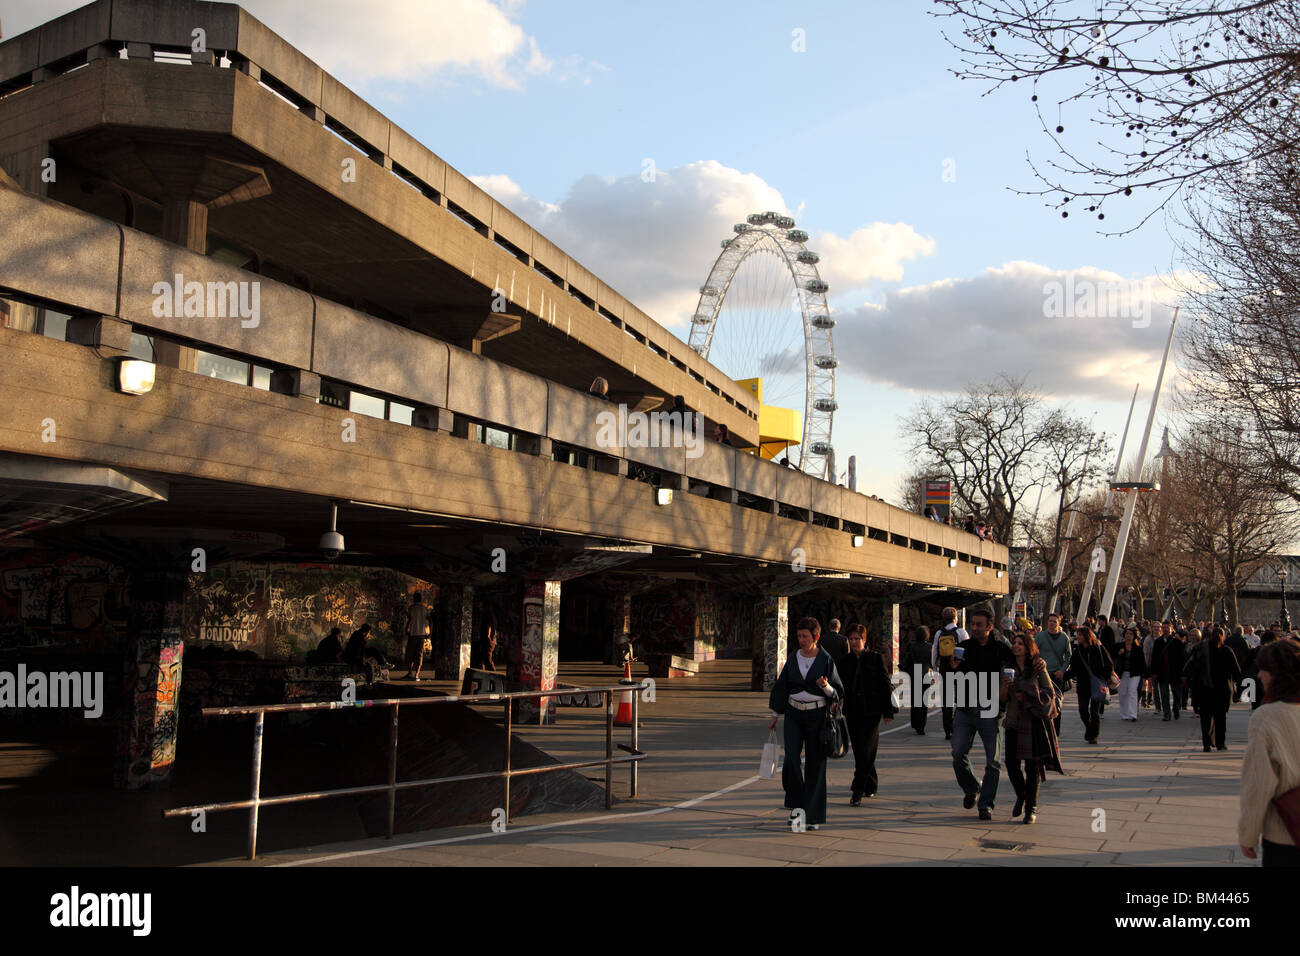 Queen Elizabeth Hall, Purcell Room and the London Eye, Southbank Centre London, UK. Stock Photo